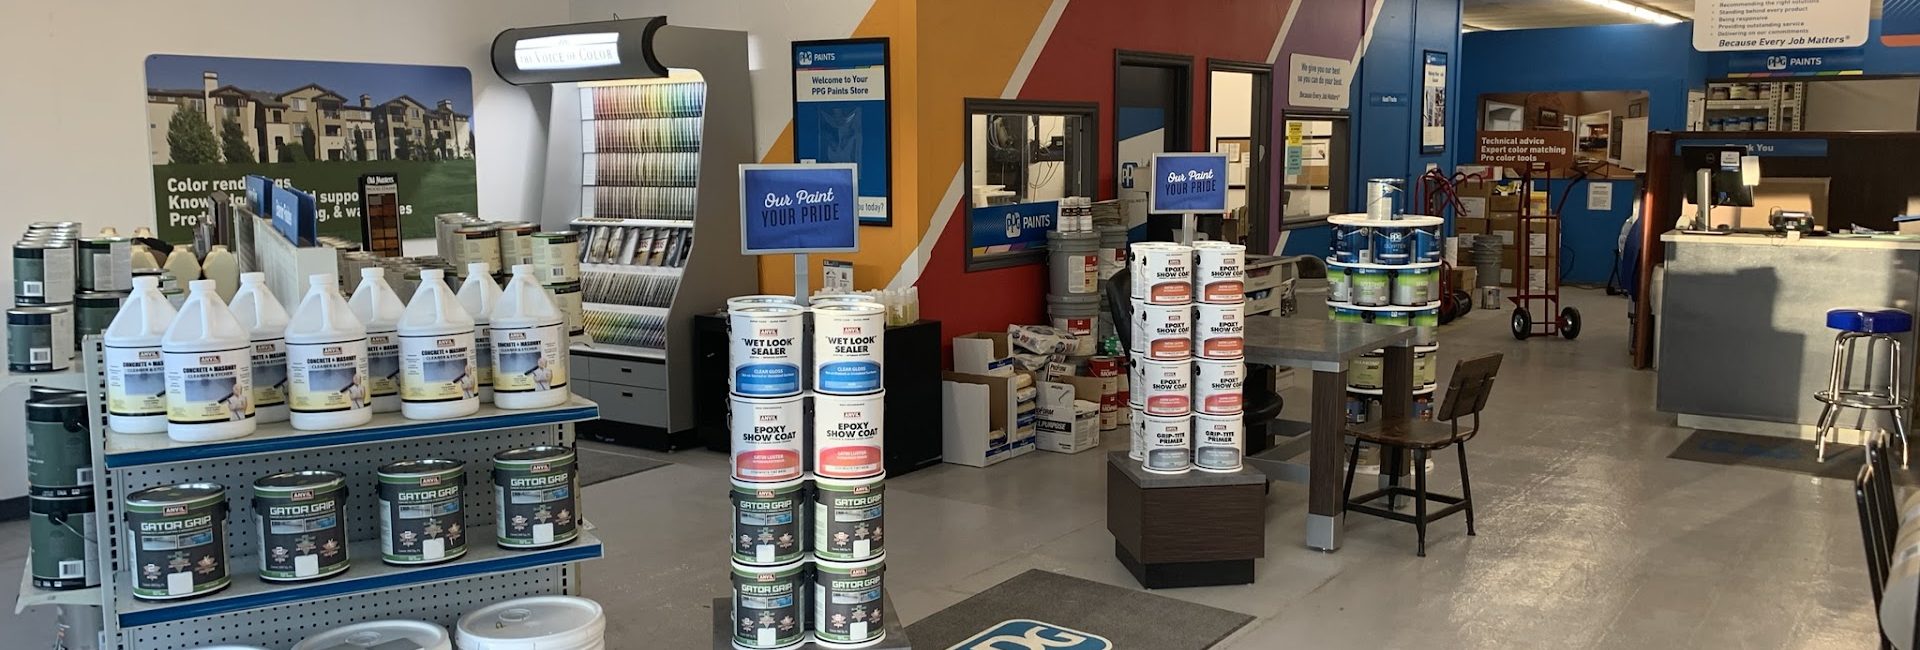 PPG Paint Store 2